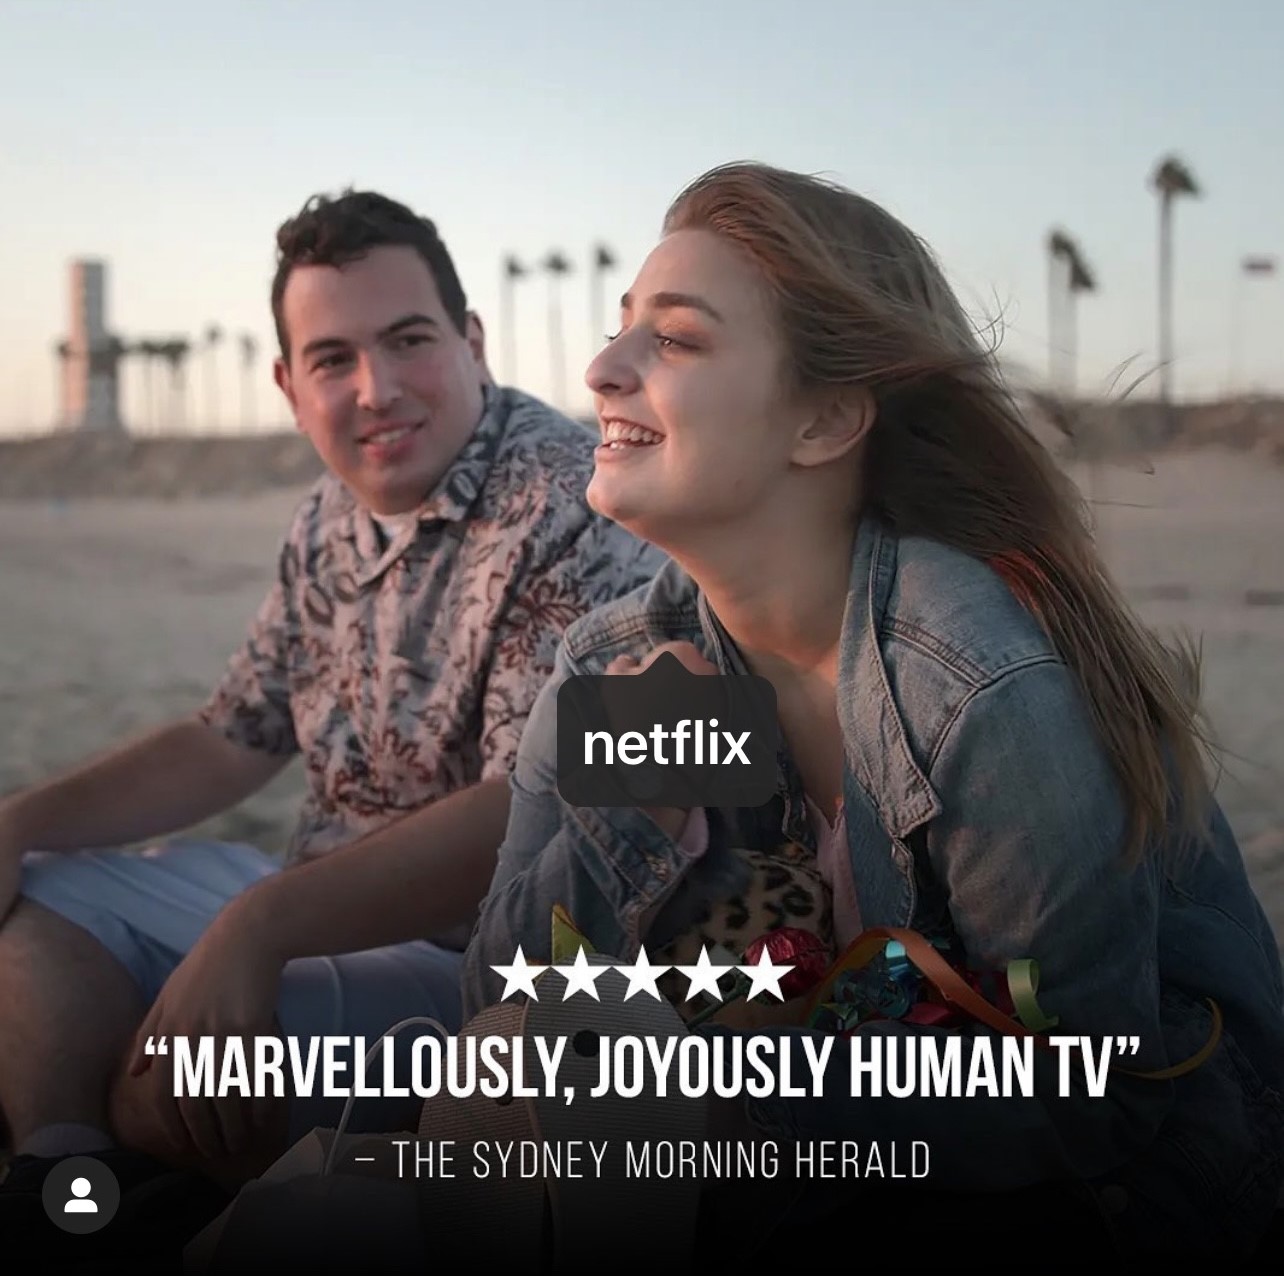 Abbey in a promo photo for Love On The Spectrum US, with a 5 star rating at the bottom, and a quote from The Sydney Morning Herald, saying "Marvelously, Joyously Human TV" and a tag to Netflix. 